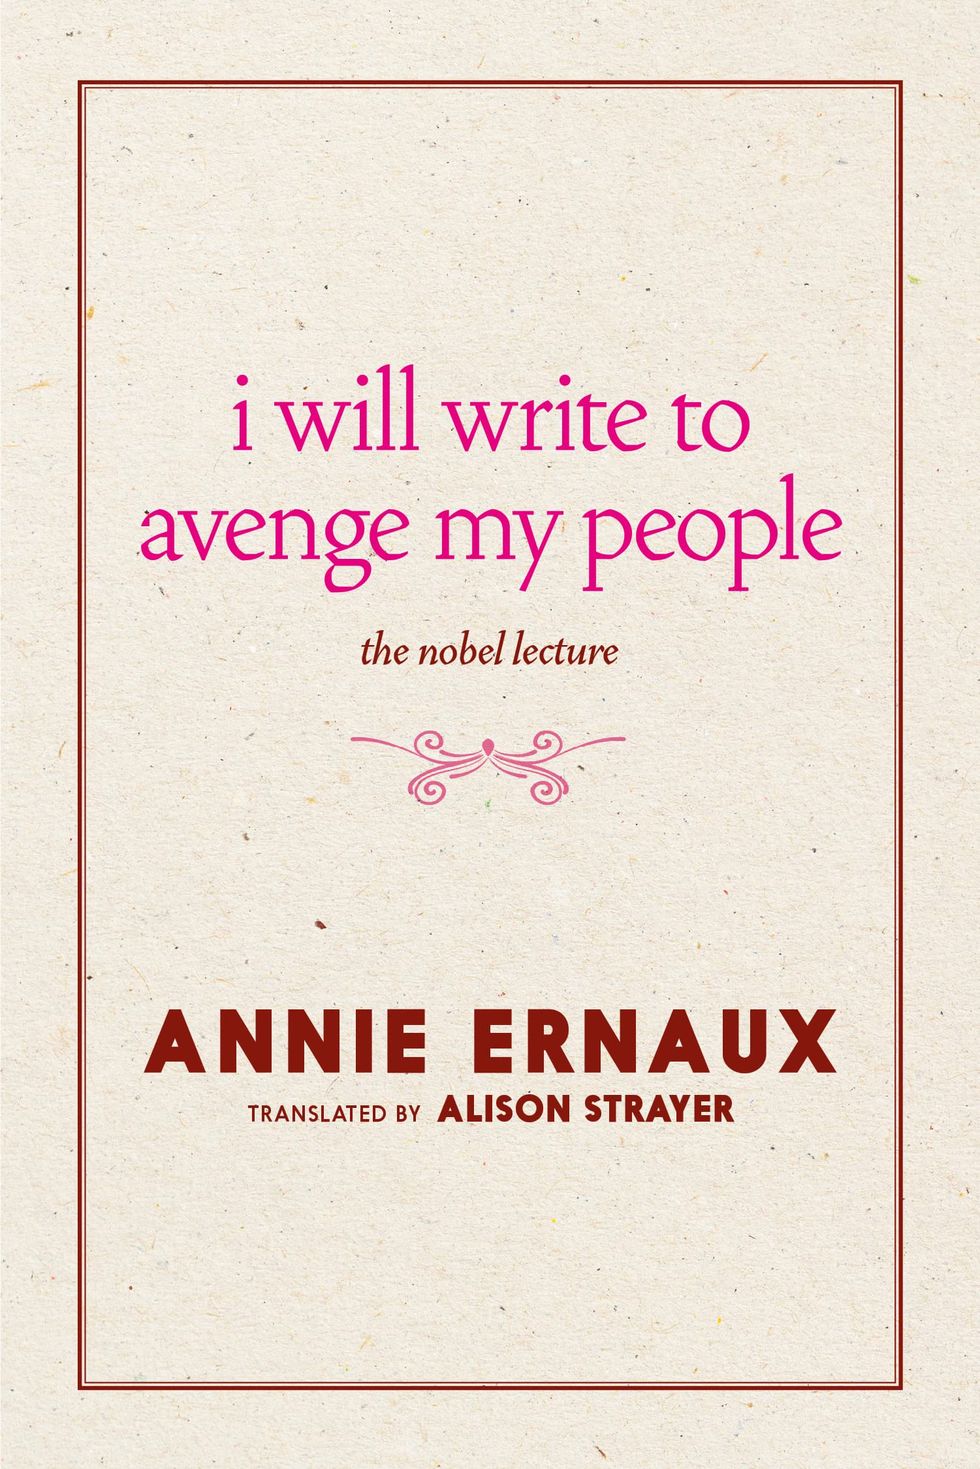 Jessica Andrews' Top Pick: i will write to avenge my people: the nobel lecture by Annie Ernaux